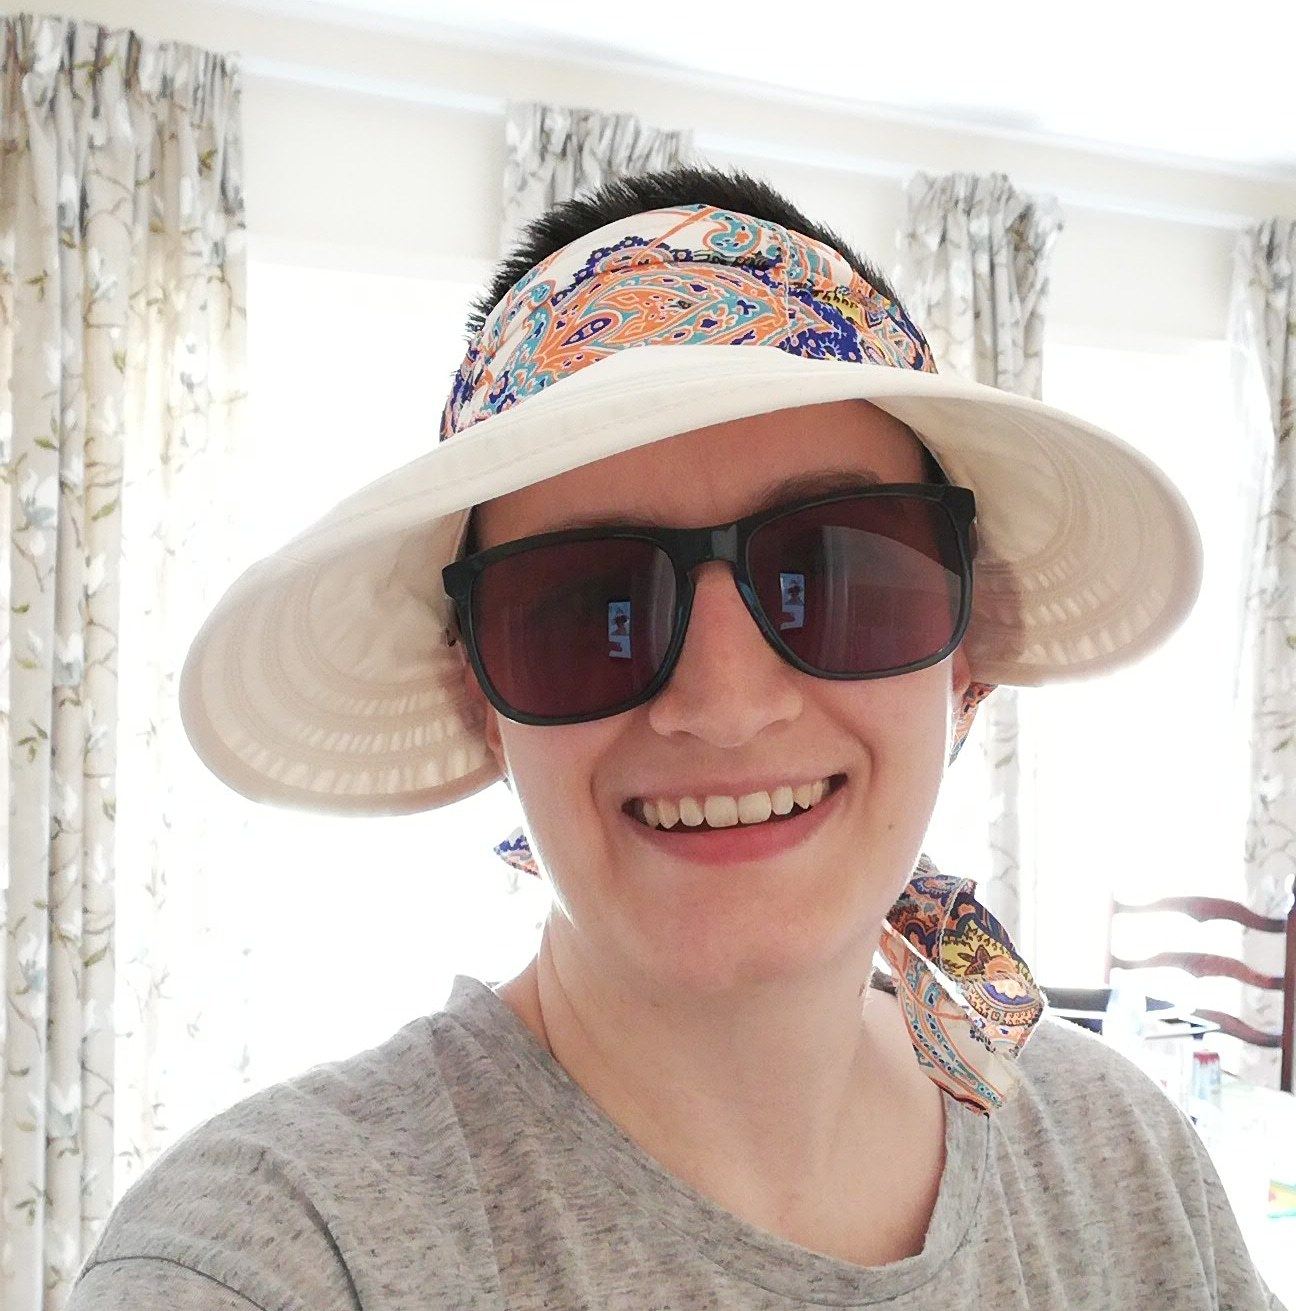 Char wearing a wide-rimmed summer hat and sunglasses. There are large windows behind her with floral curtains hanging.